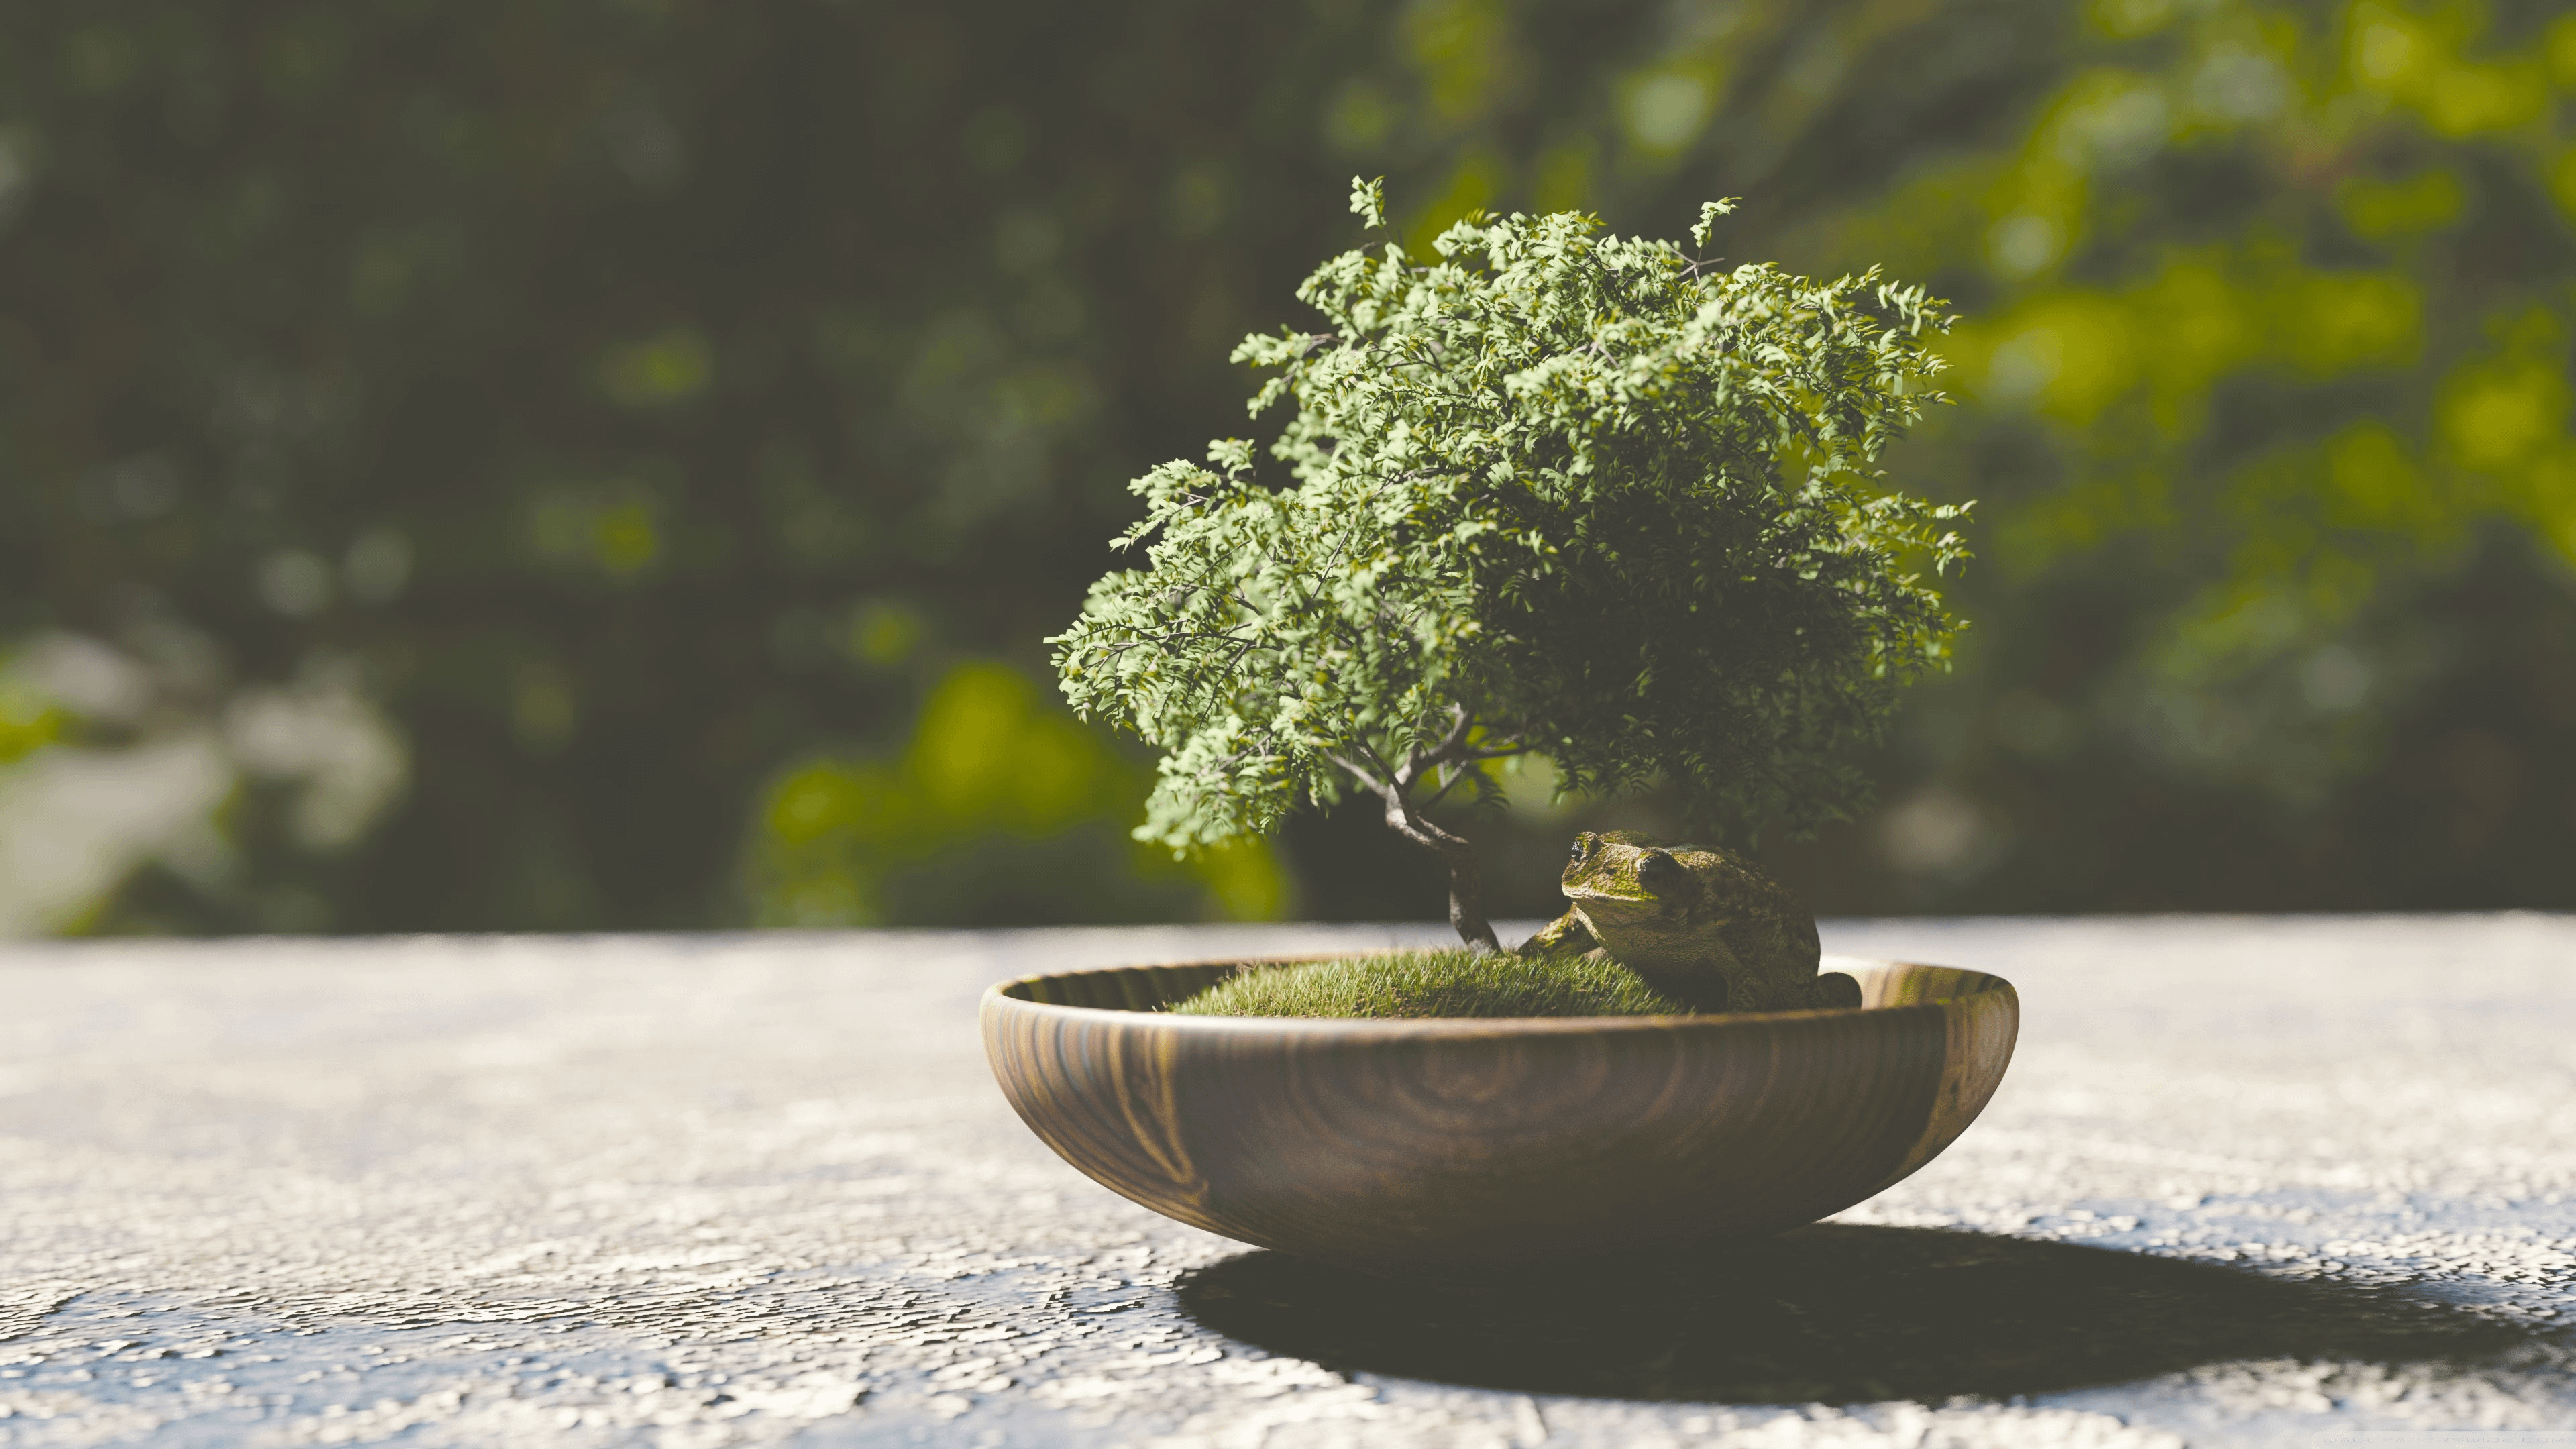 Tree Poaching or Bonsai Collecting? Where Does One Draw the Line? - Bonsai  Tree Gardener